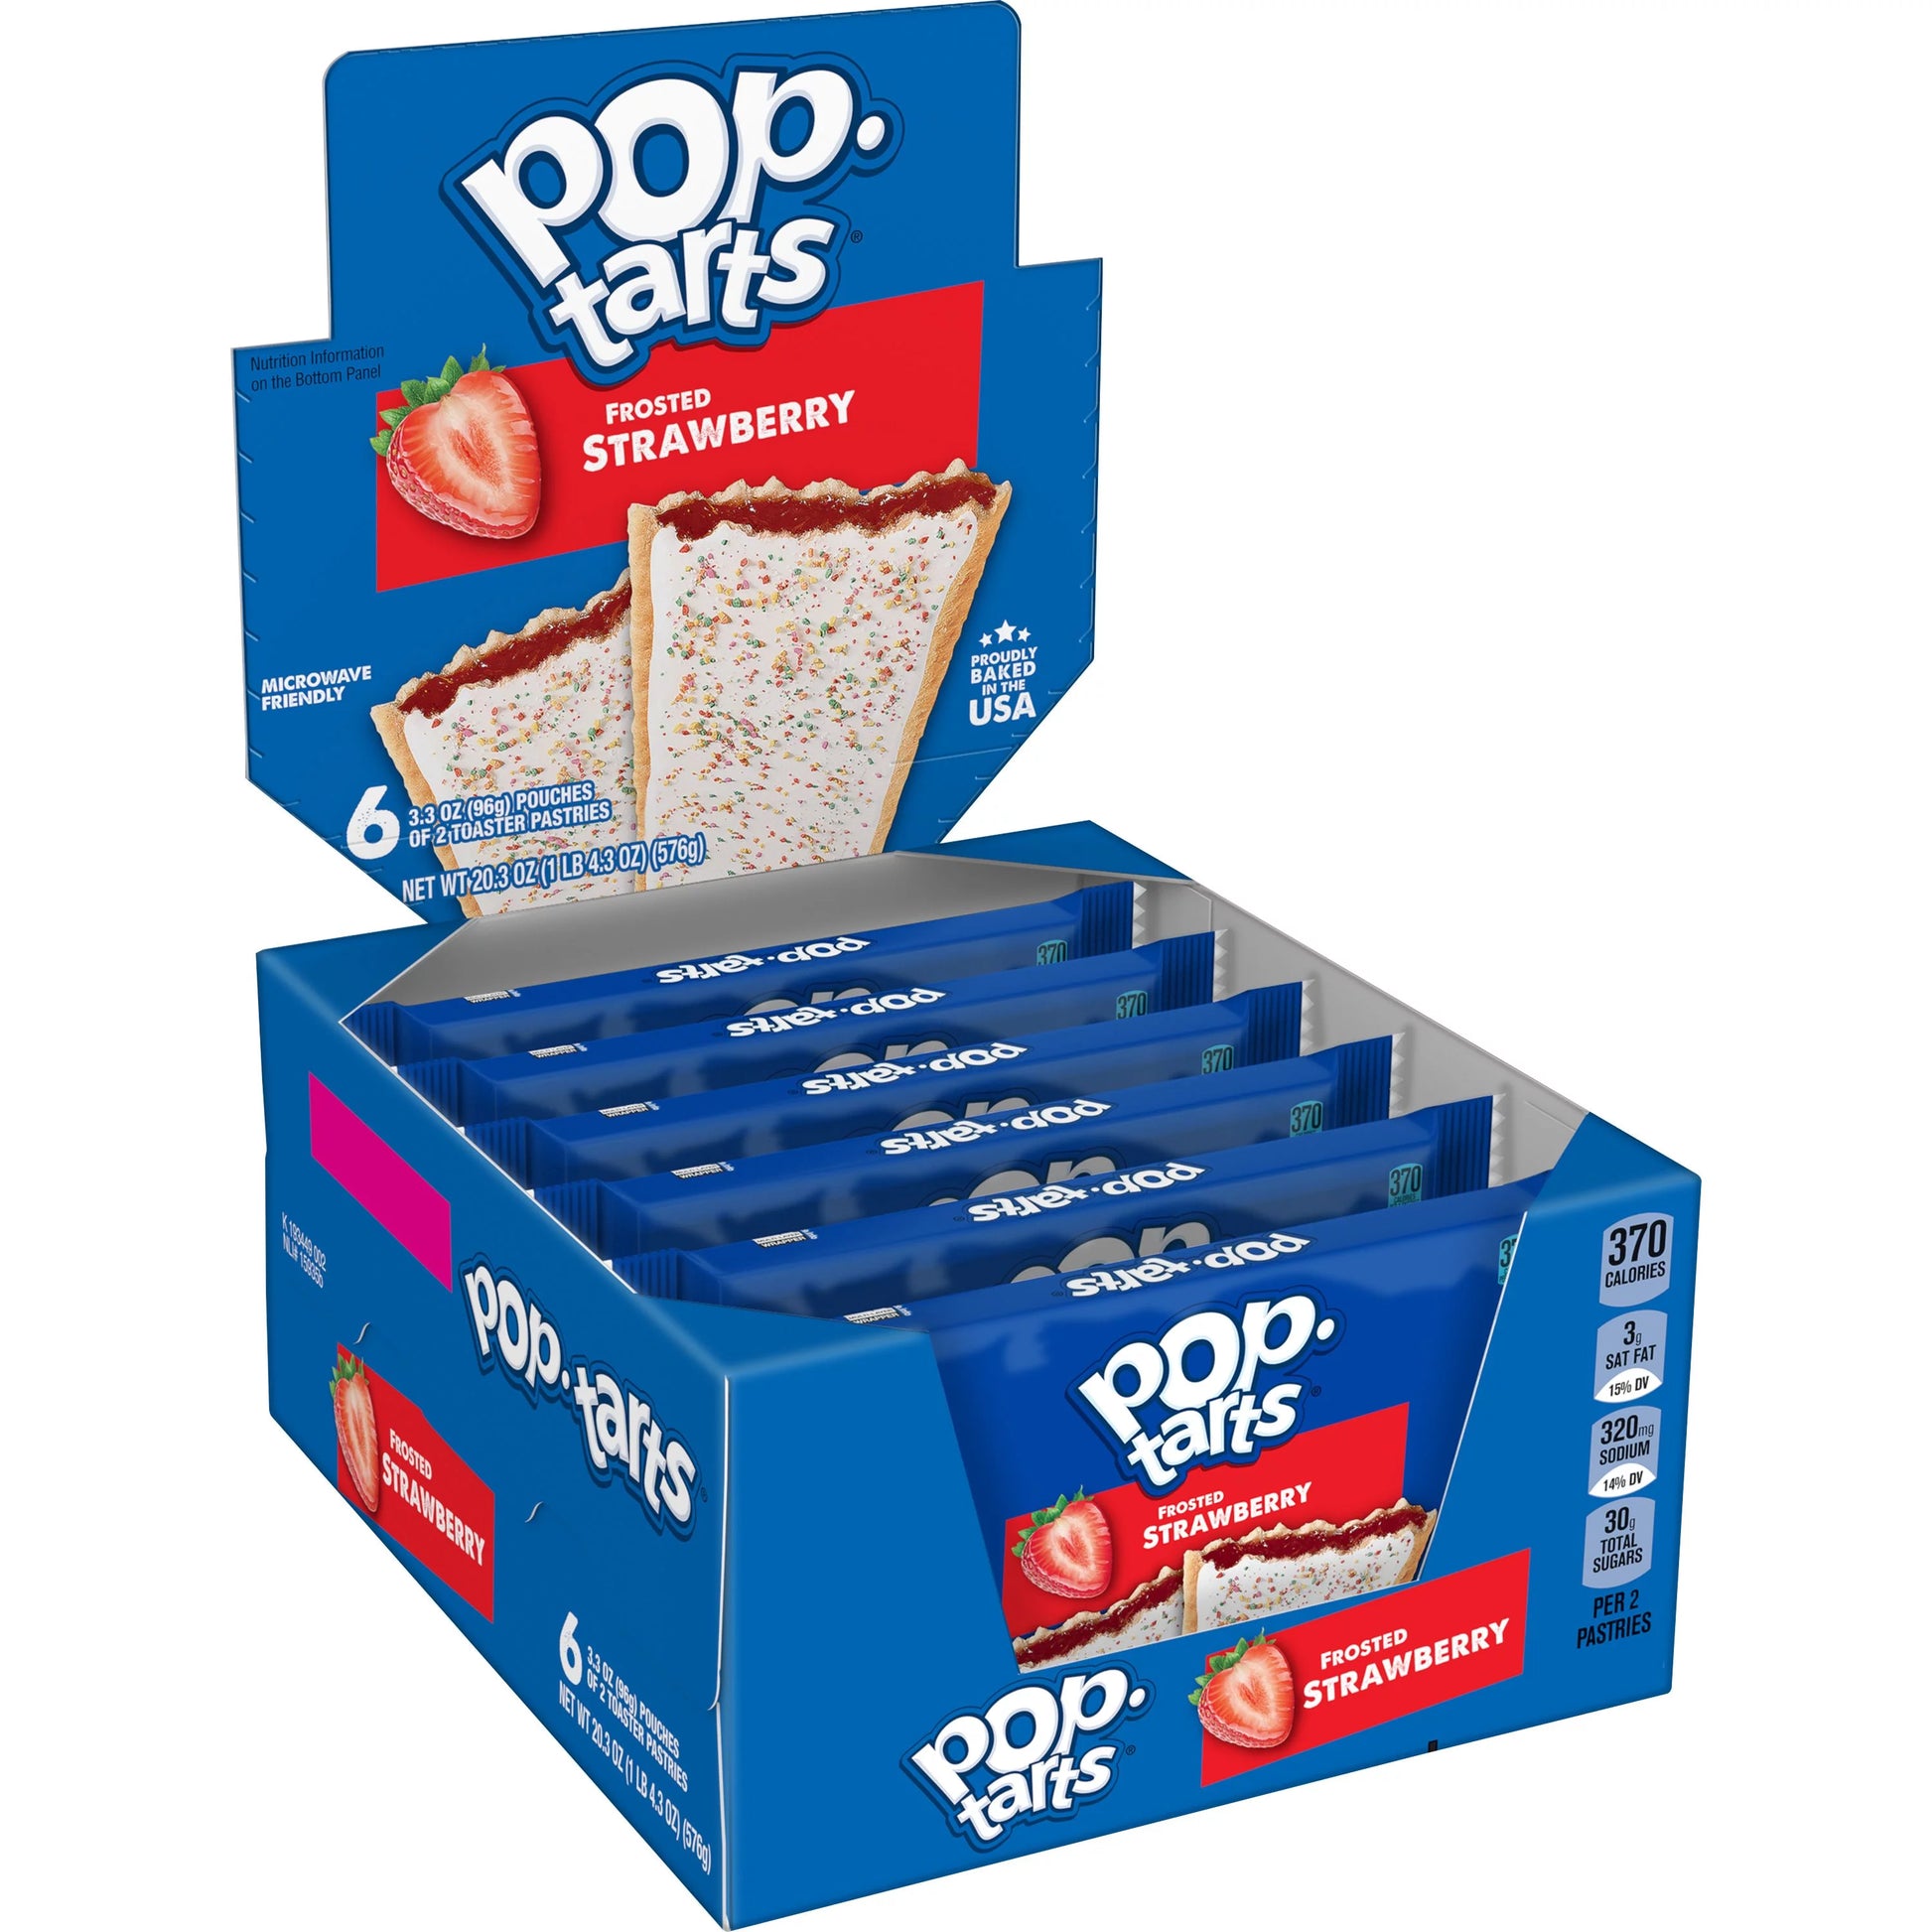 Pop-Tarts Frosted Strawberry (Pack of 6)